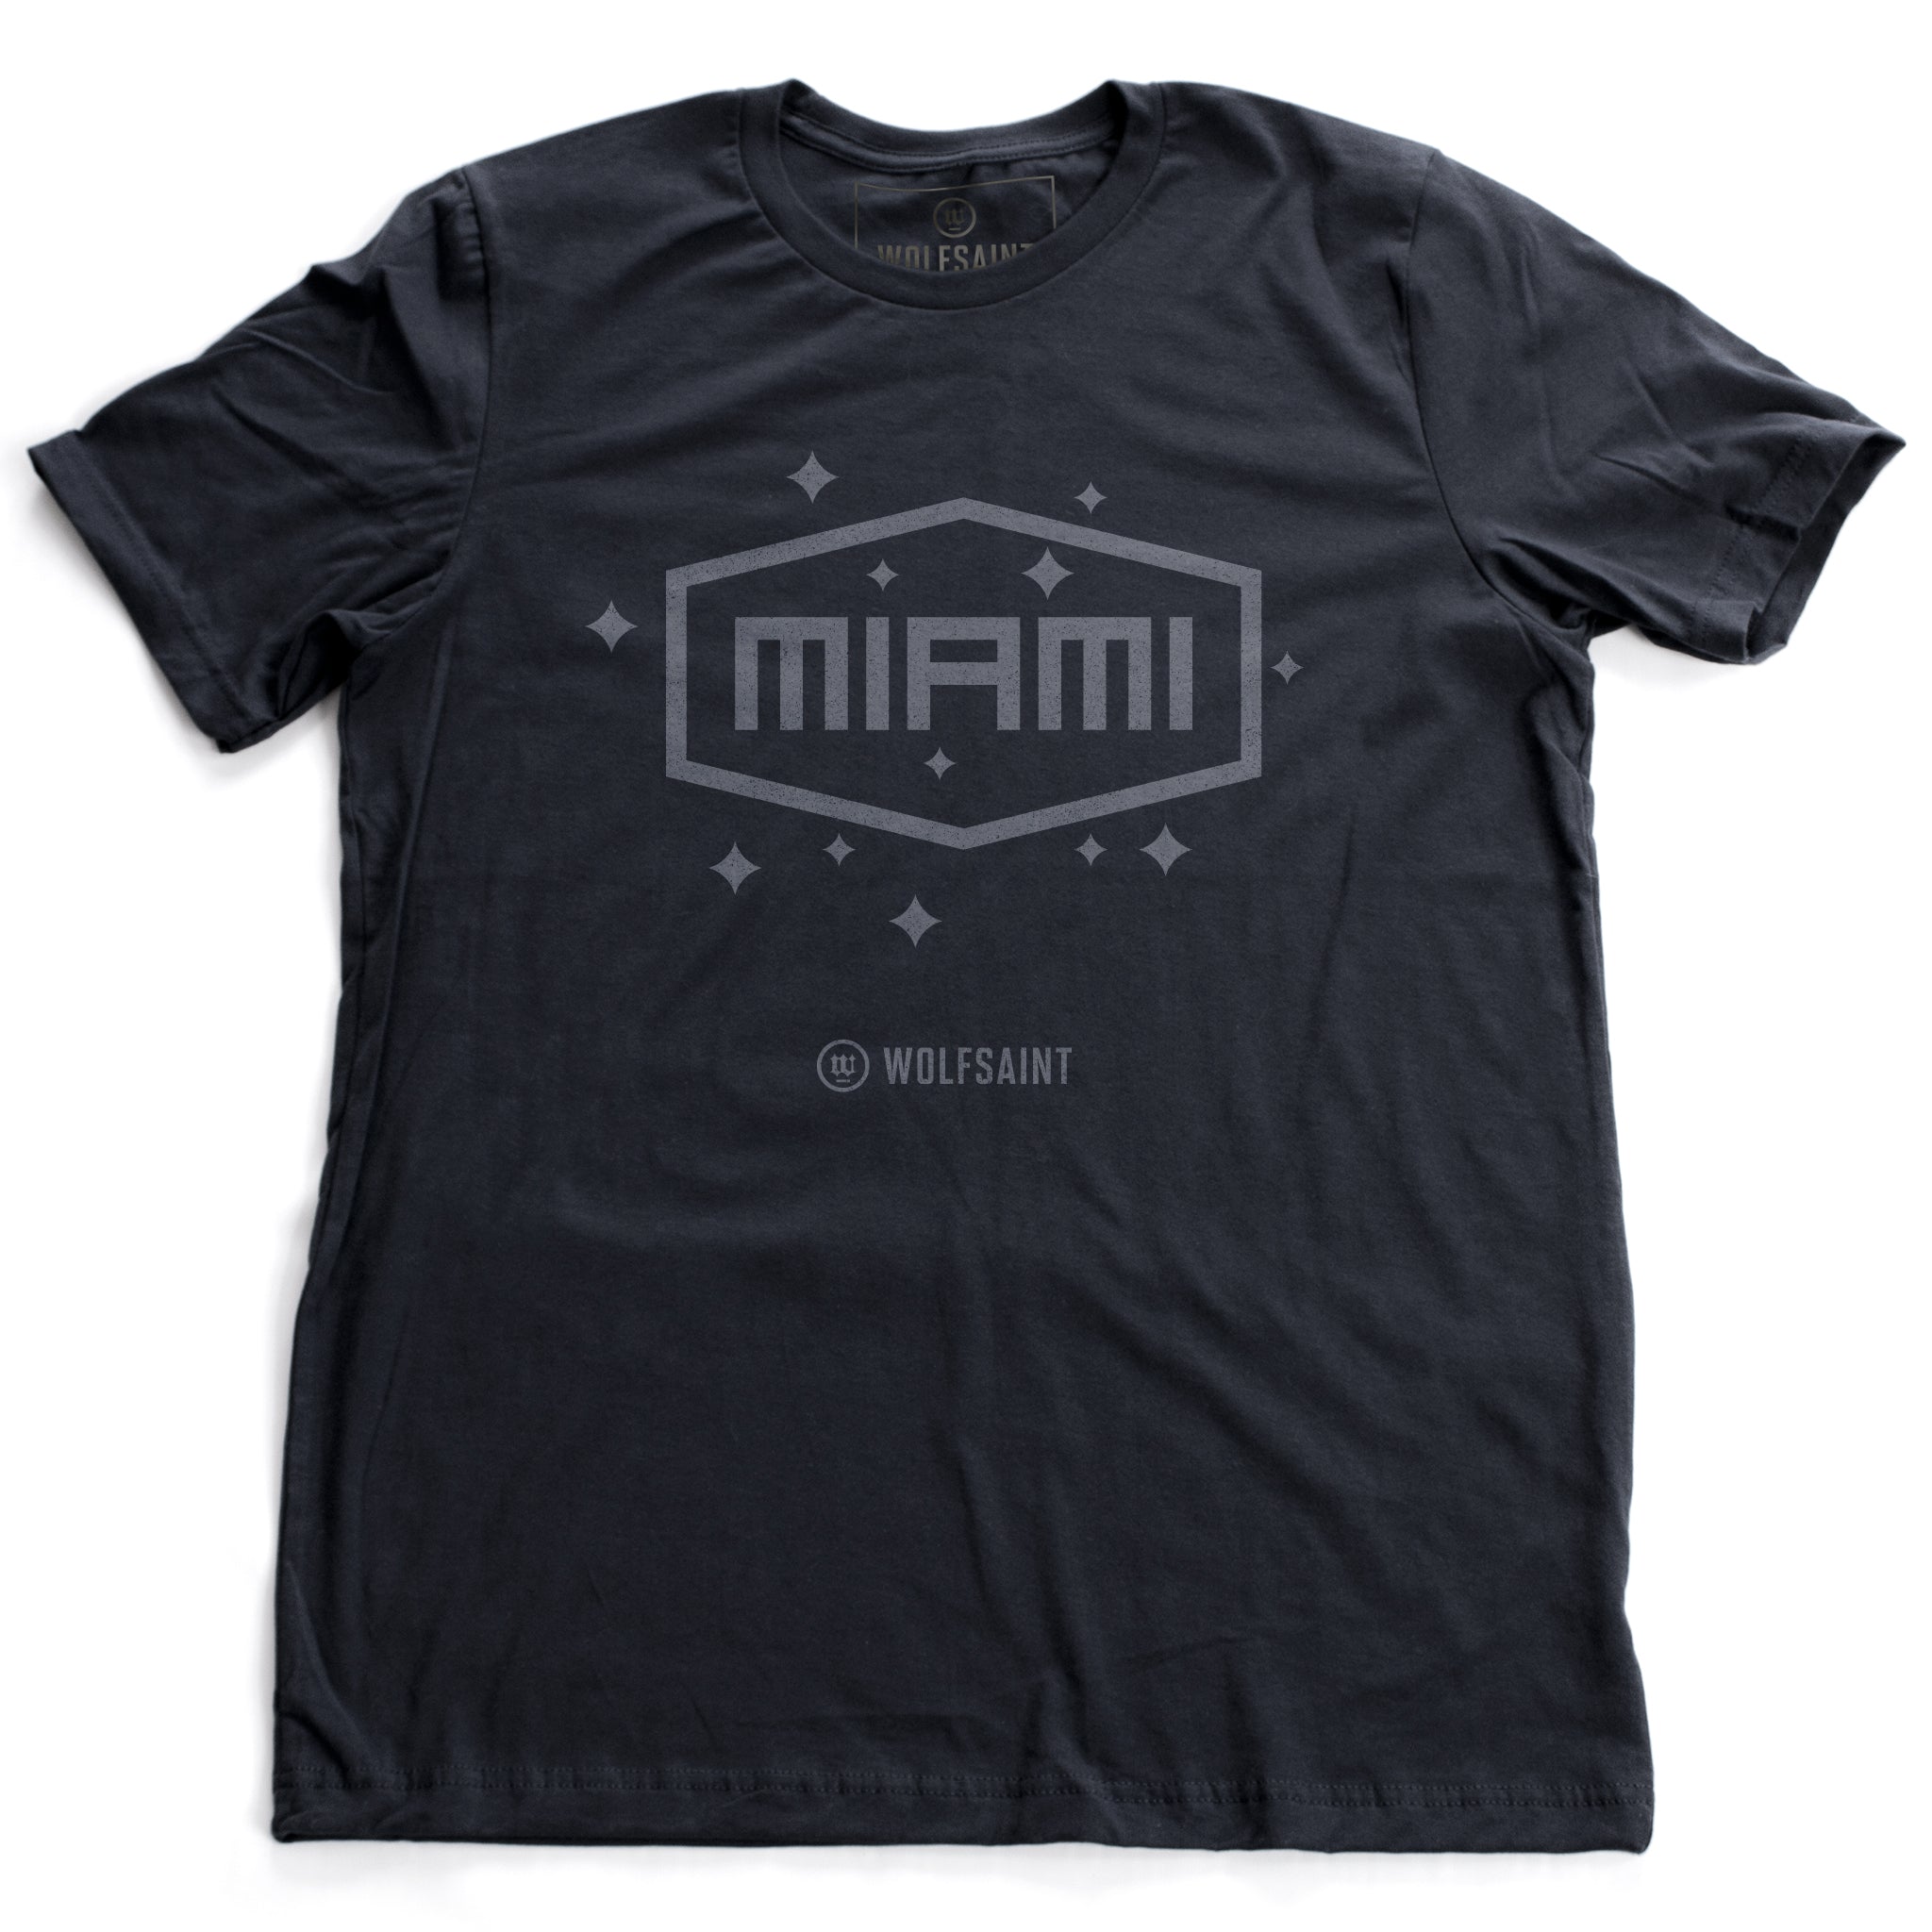 A vintage-inspired, retro fashion t-shirt in classic Navy Blue with a simple “MIAMI” graphic in a field of stars. From wolfsaint.net